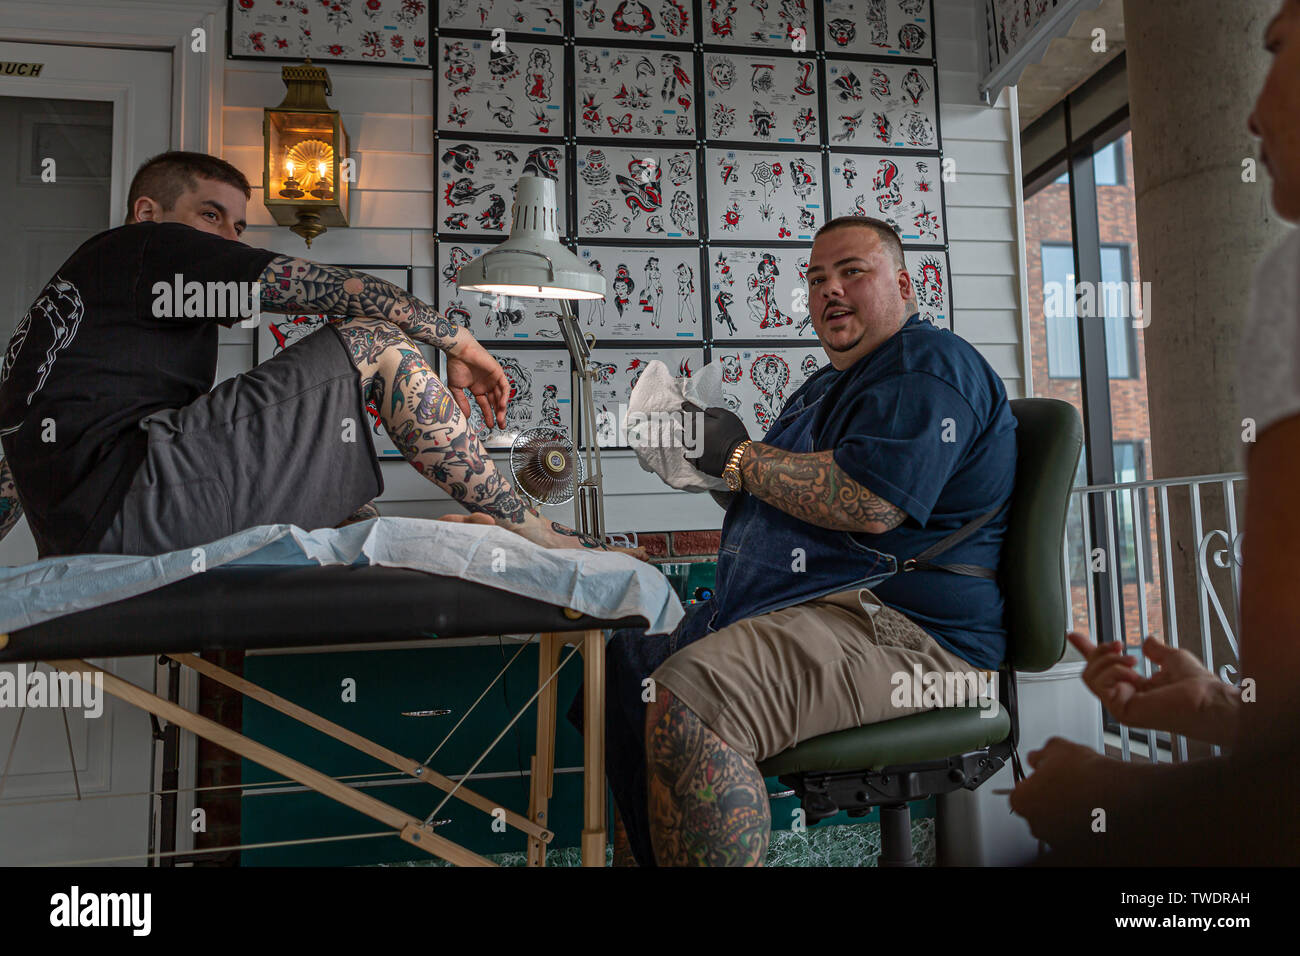 Brooklyn, United States. 19th June, 2019. Tattoo artist Bert Krak, center. Beyond the Streets, the premier exhibition of graffiti, street art and beyond opened in Brooklyn, New York on June 19, 2019. The massive show celebrates more than 150 artists from around the world including Shepard Fairey, Beastie Boys, Glen E. Friedman, SWOON and Guerrilla Girls. Credit: Michael Nigro/Alamy Live News Stock Photo